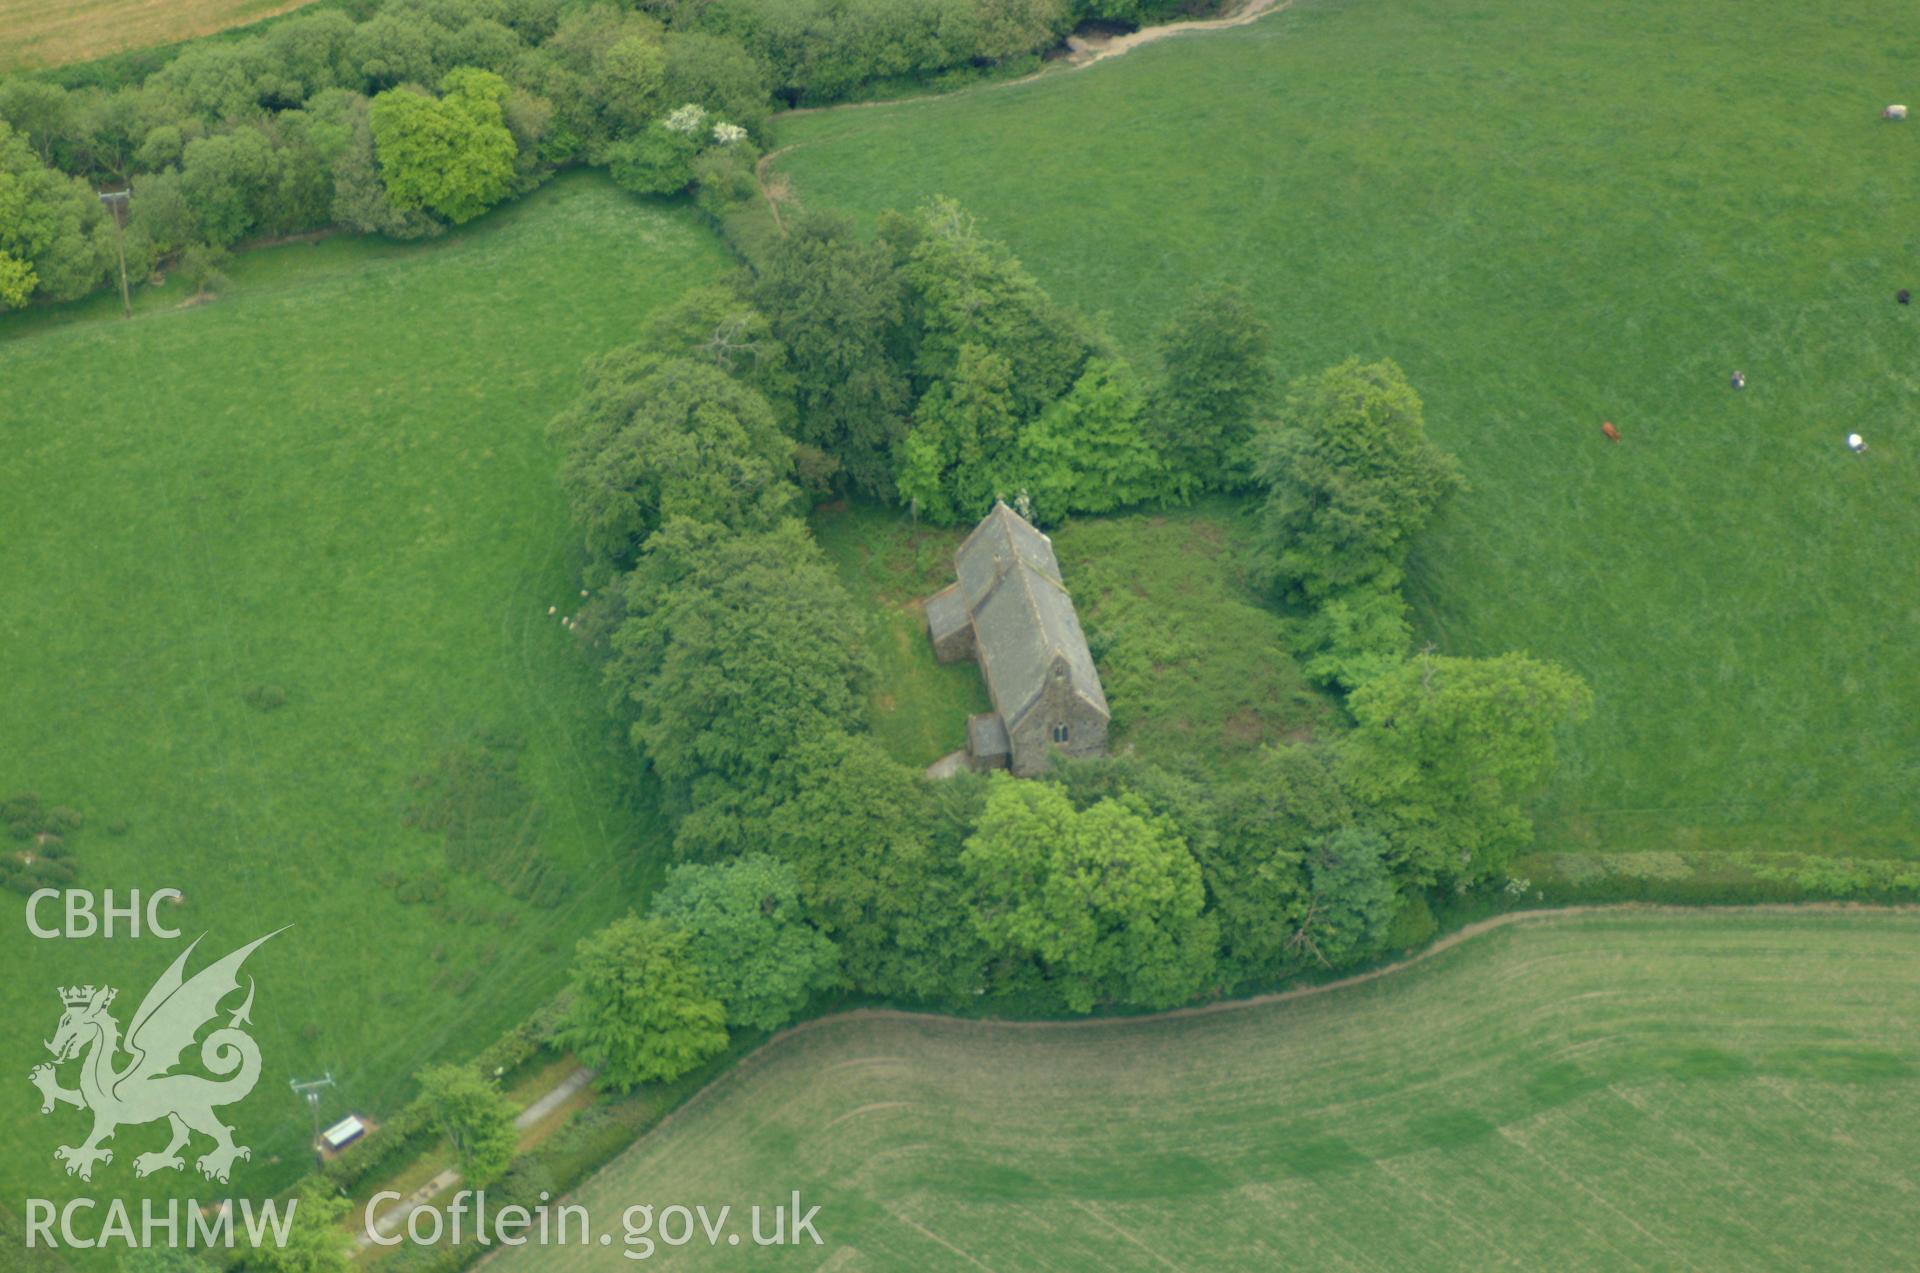 RCAHMW colour oblique aerial photograph of Llangan Church taken on 24/05/2004 by Toby Driver